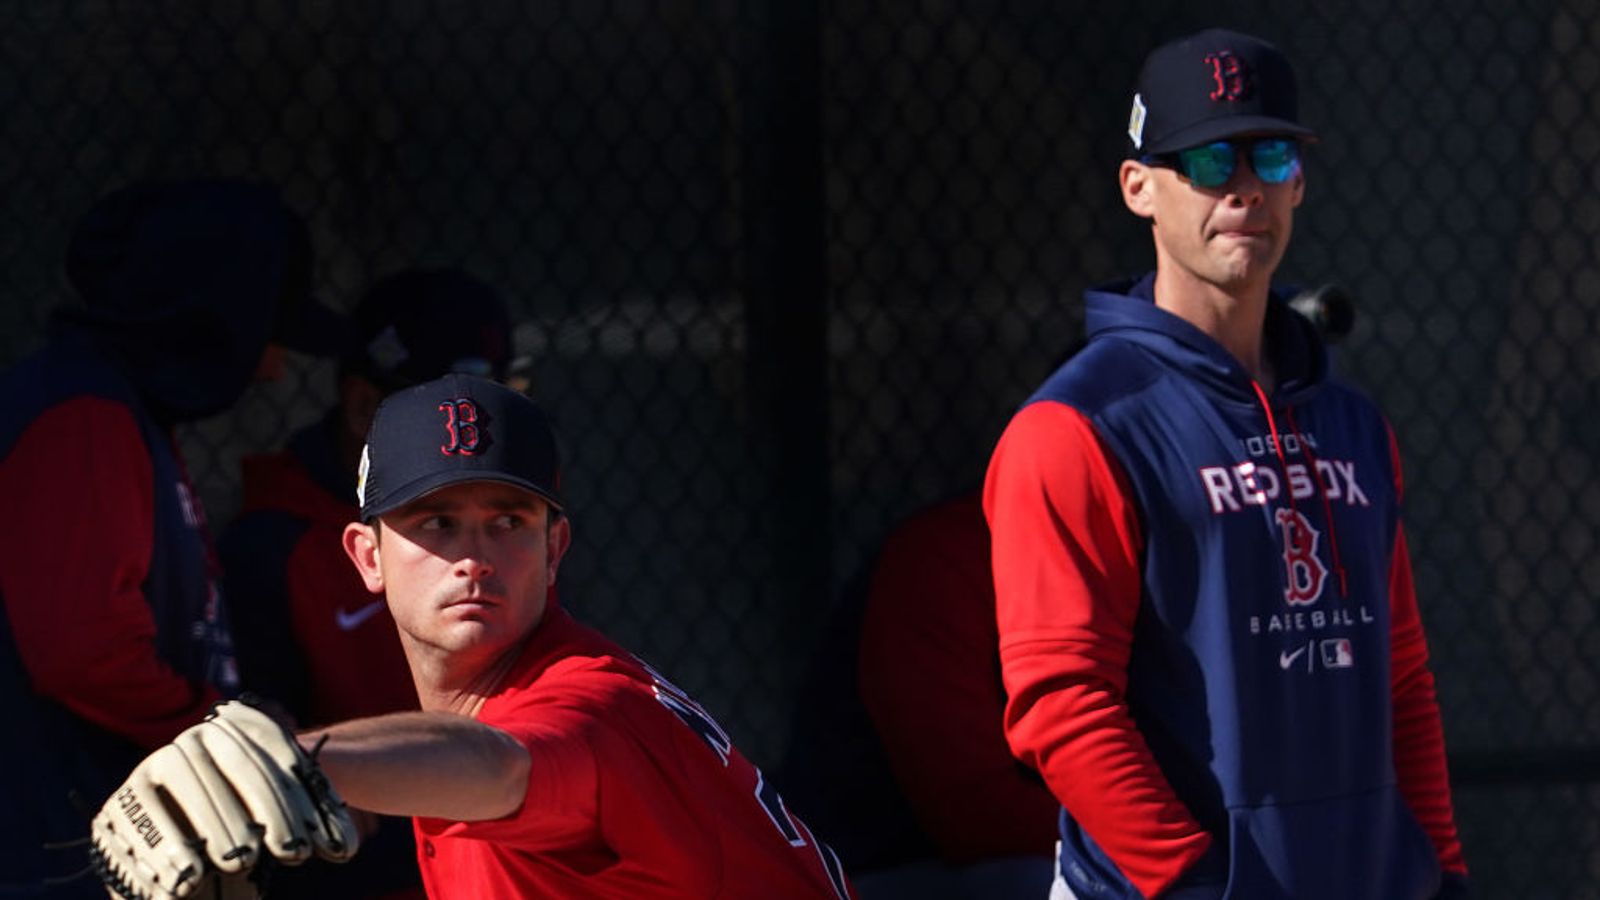 Red Sox players think they will surprise people